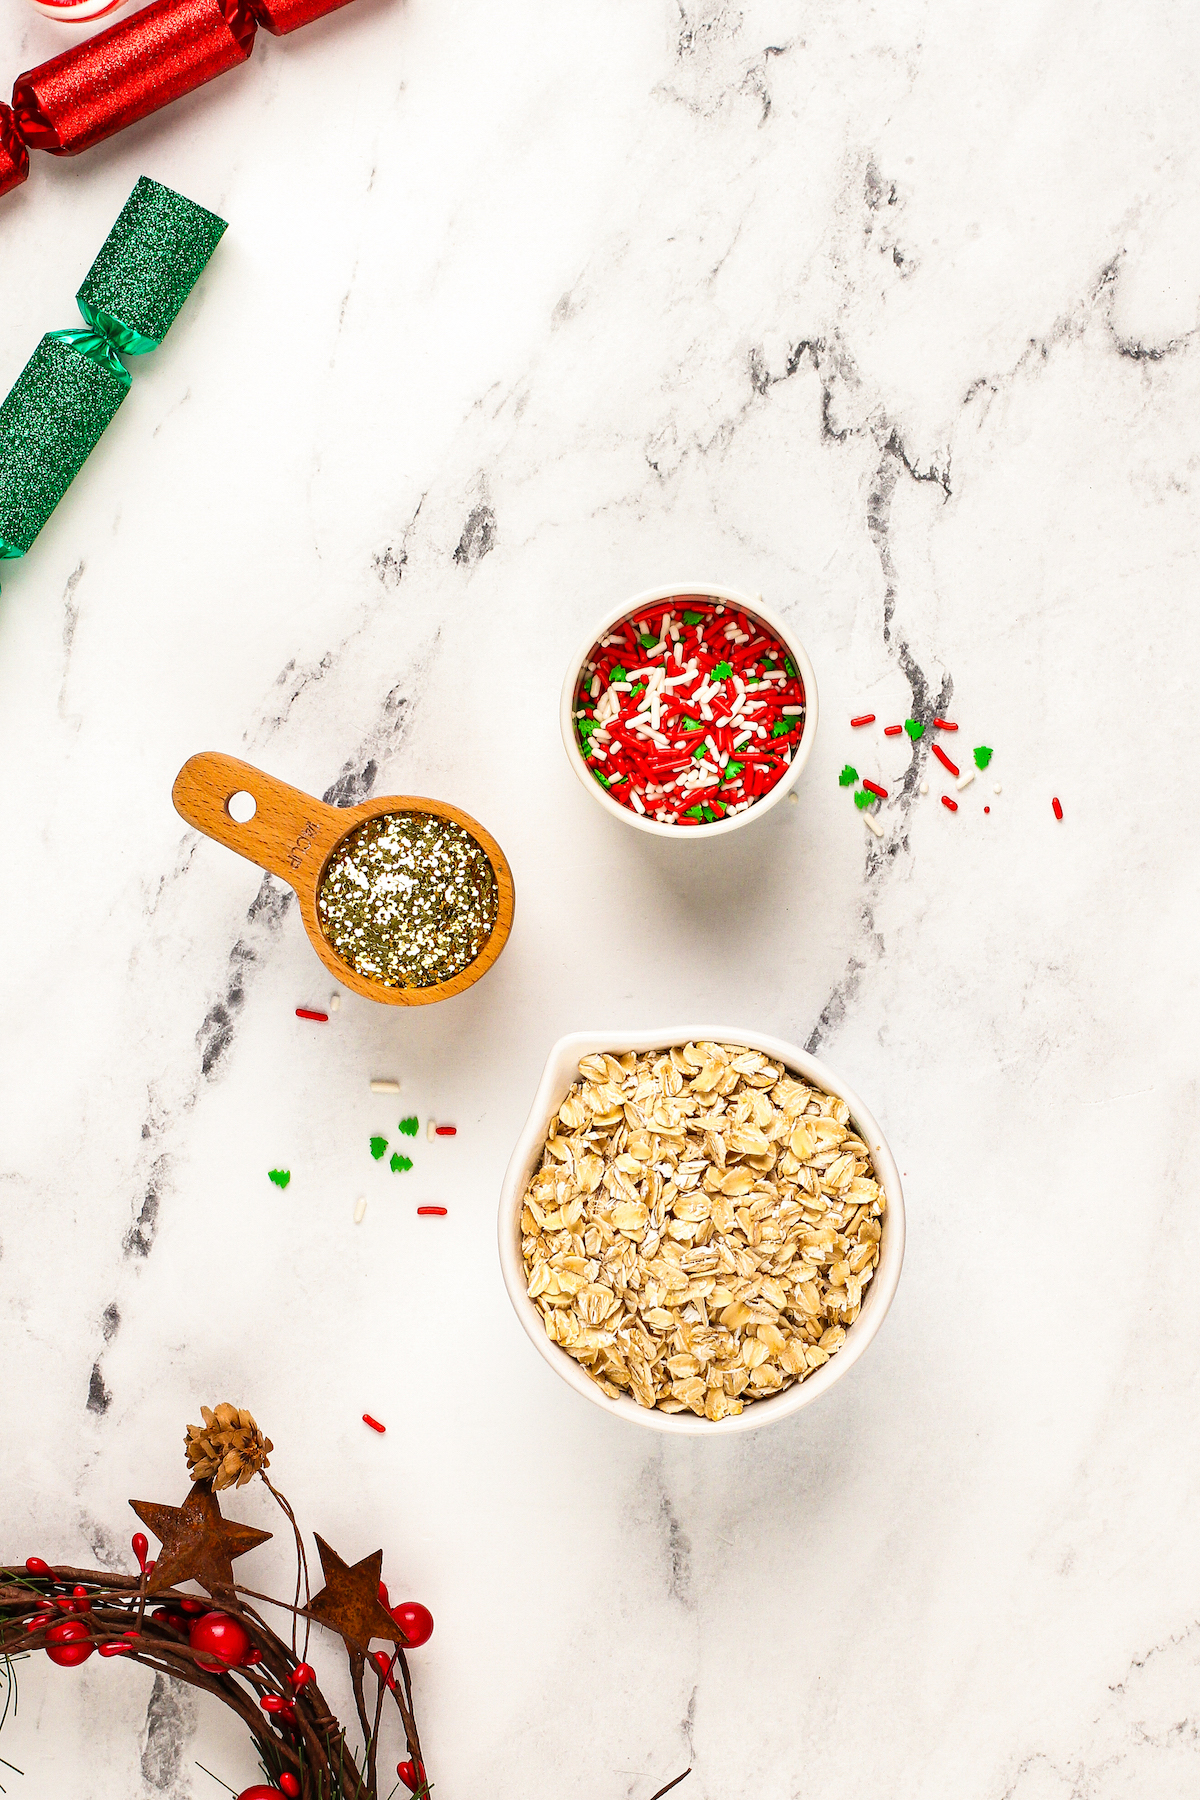 Ingredients and materials for reindeer food recipe arranged in bowls. From top to bottom: a bowl of festive colored sprinkles, a measuring cup of gold glitter and a bowl of oats.